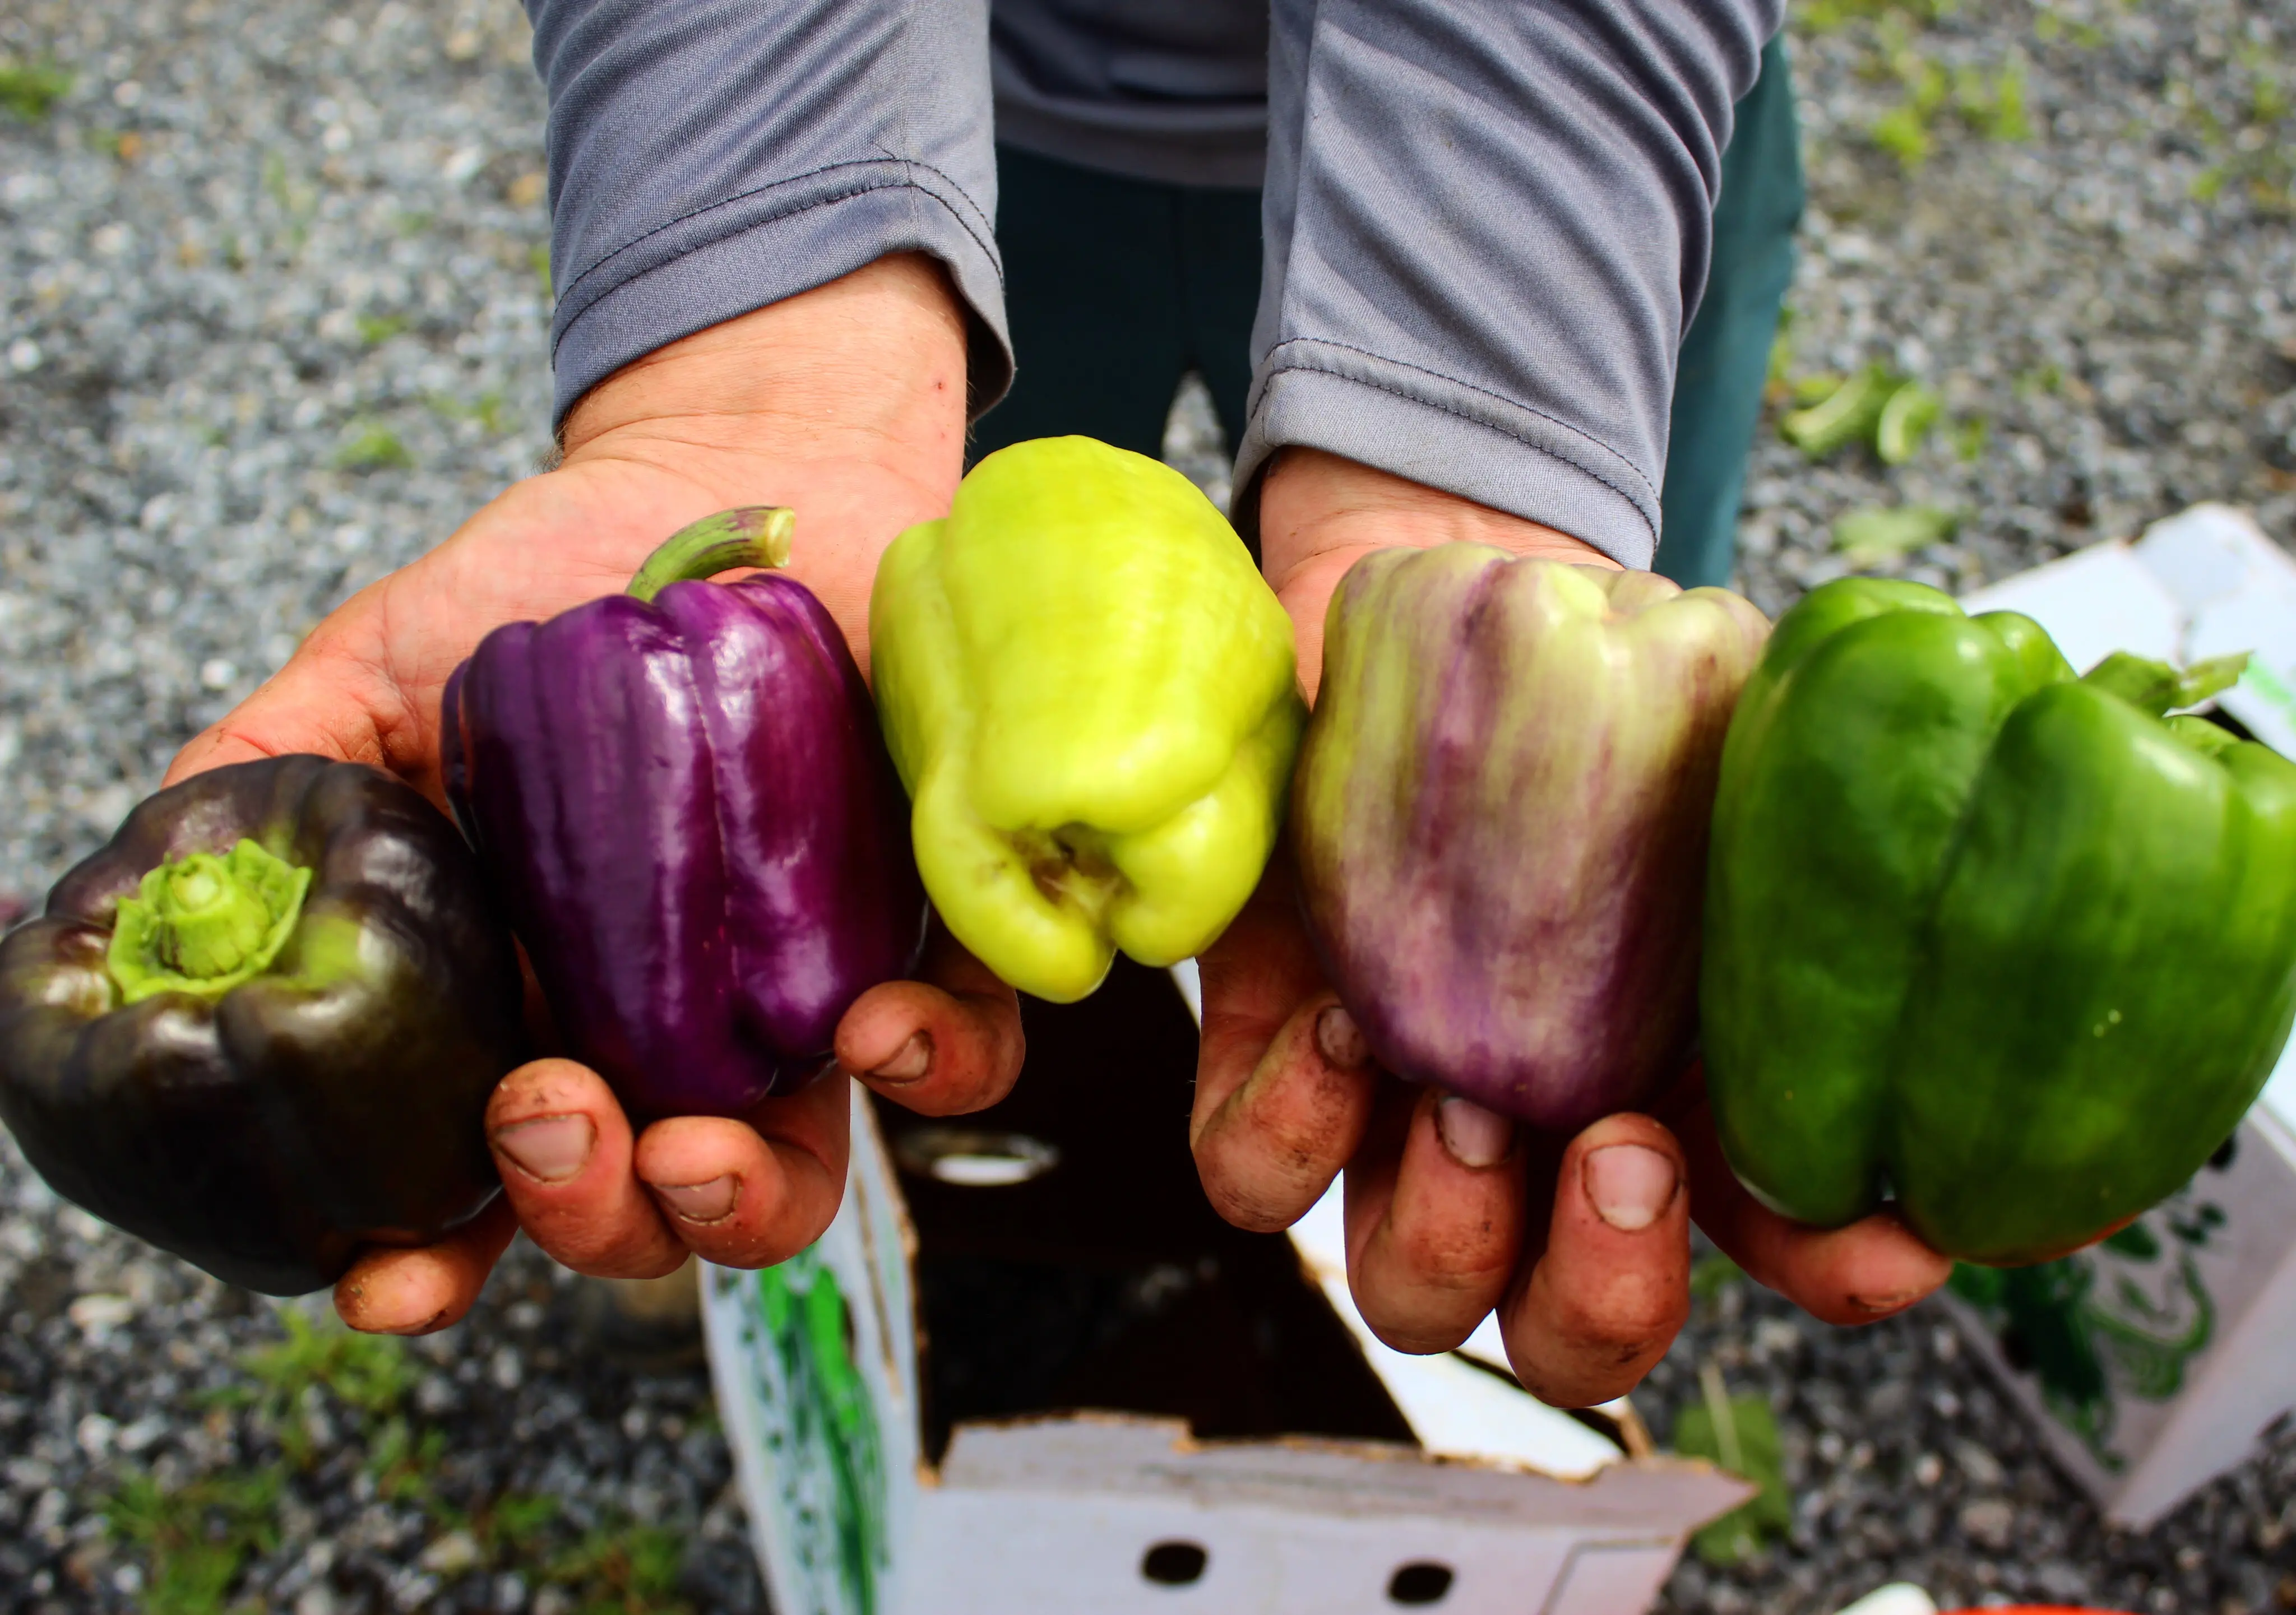 Hands hold five green and purple peppers.